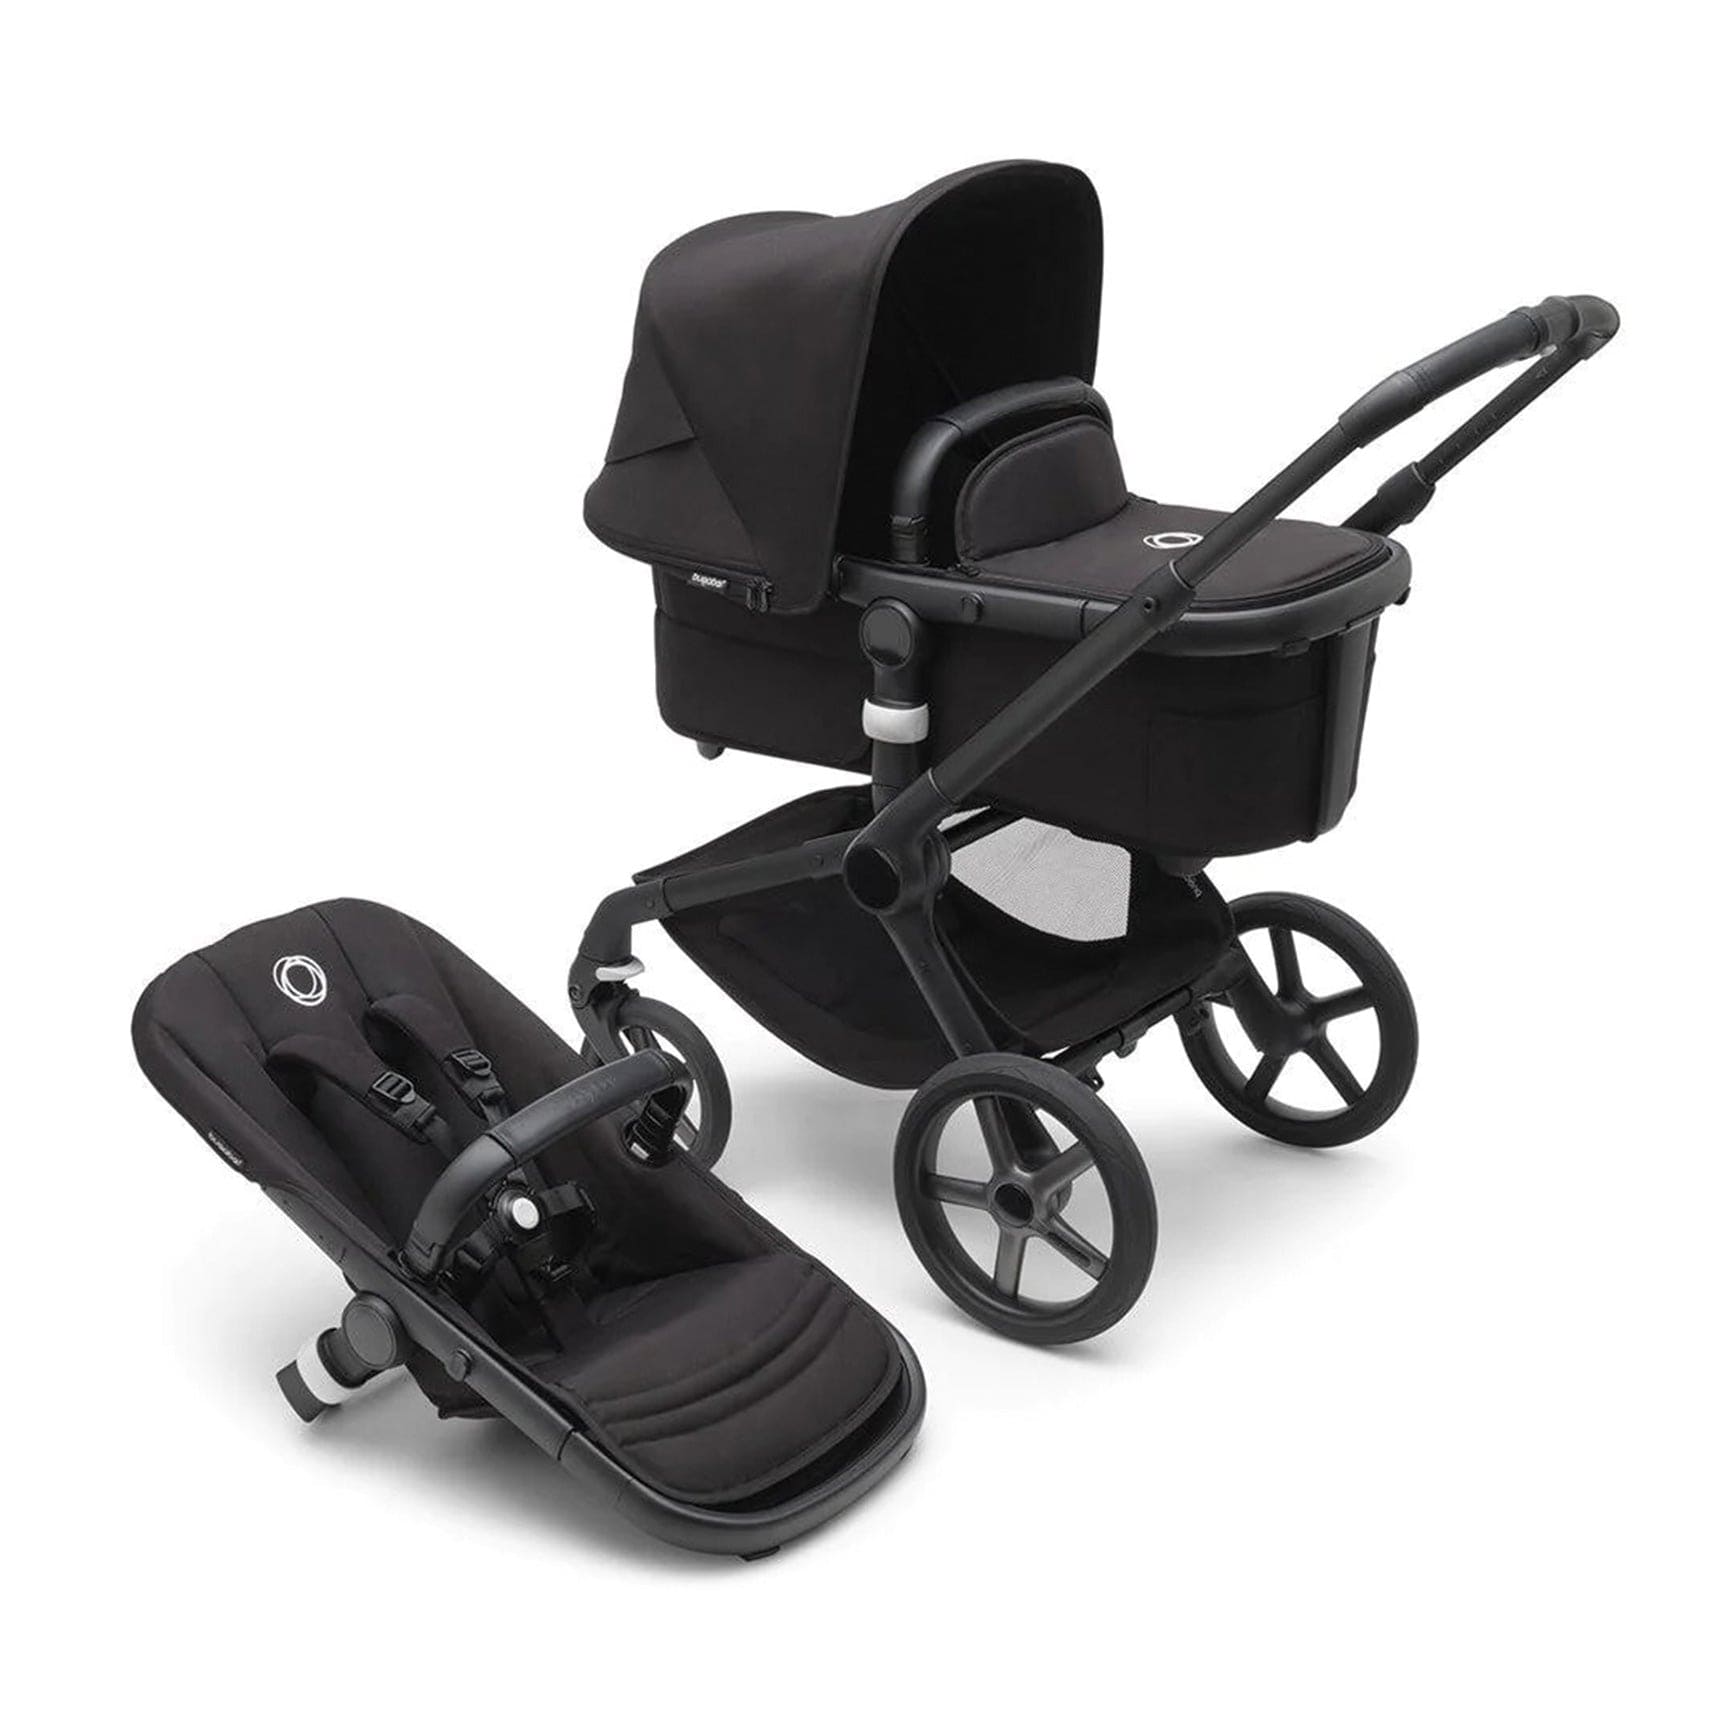 Bugaboo Fox 5 Complete Stroller in Midnight Black Pushchairs & Buggies 100051040 8717447286387